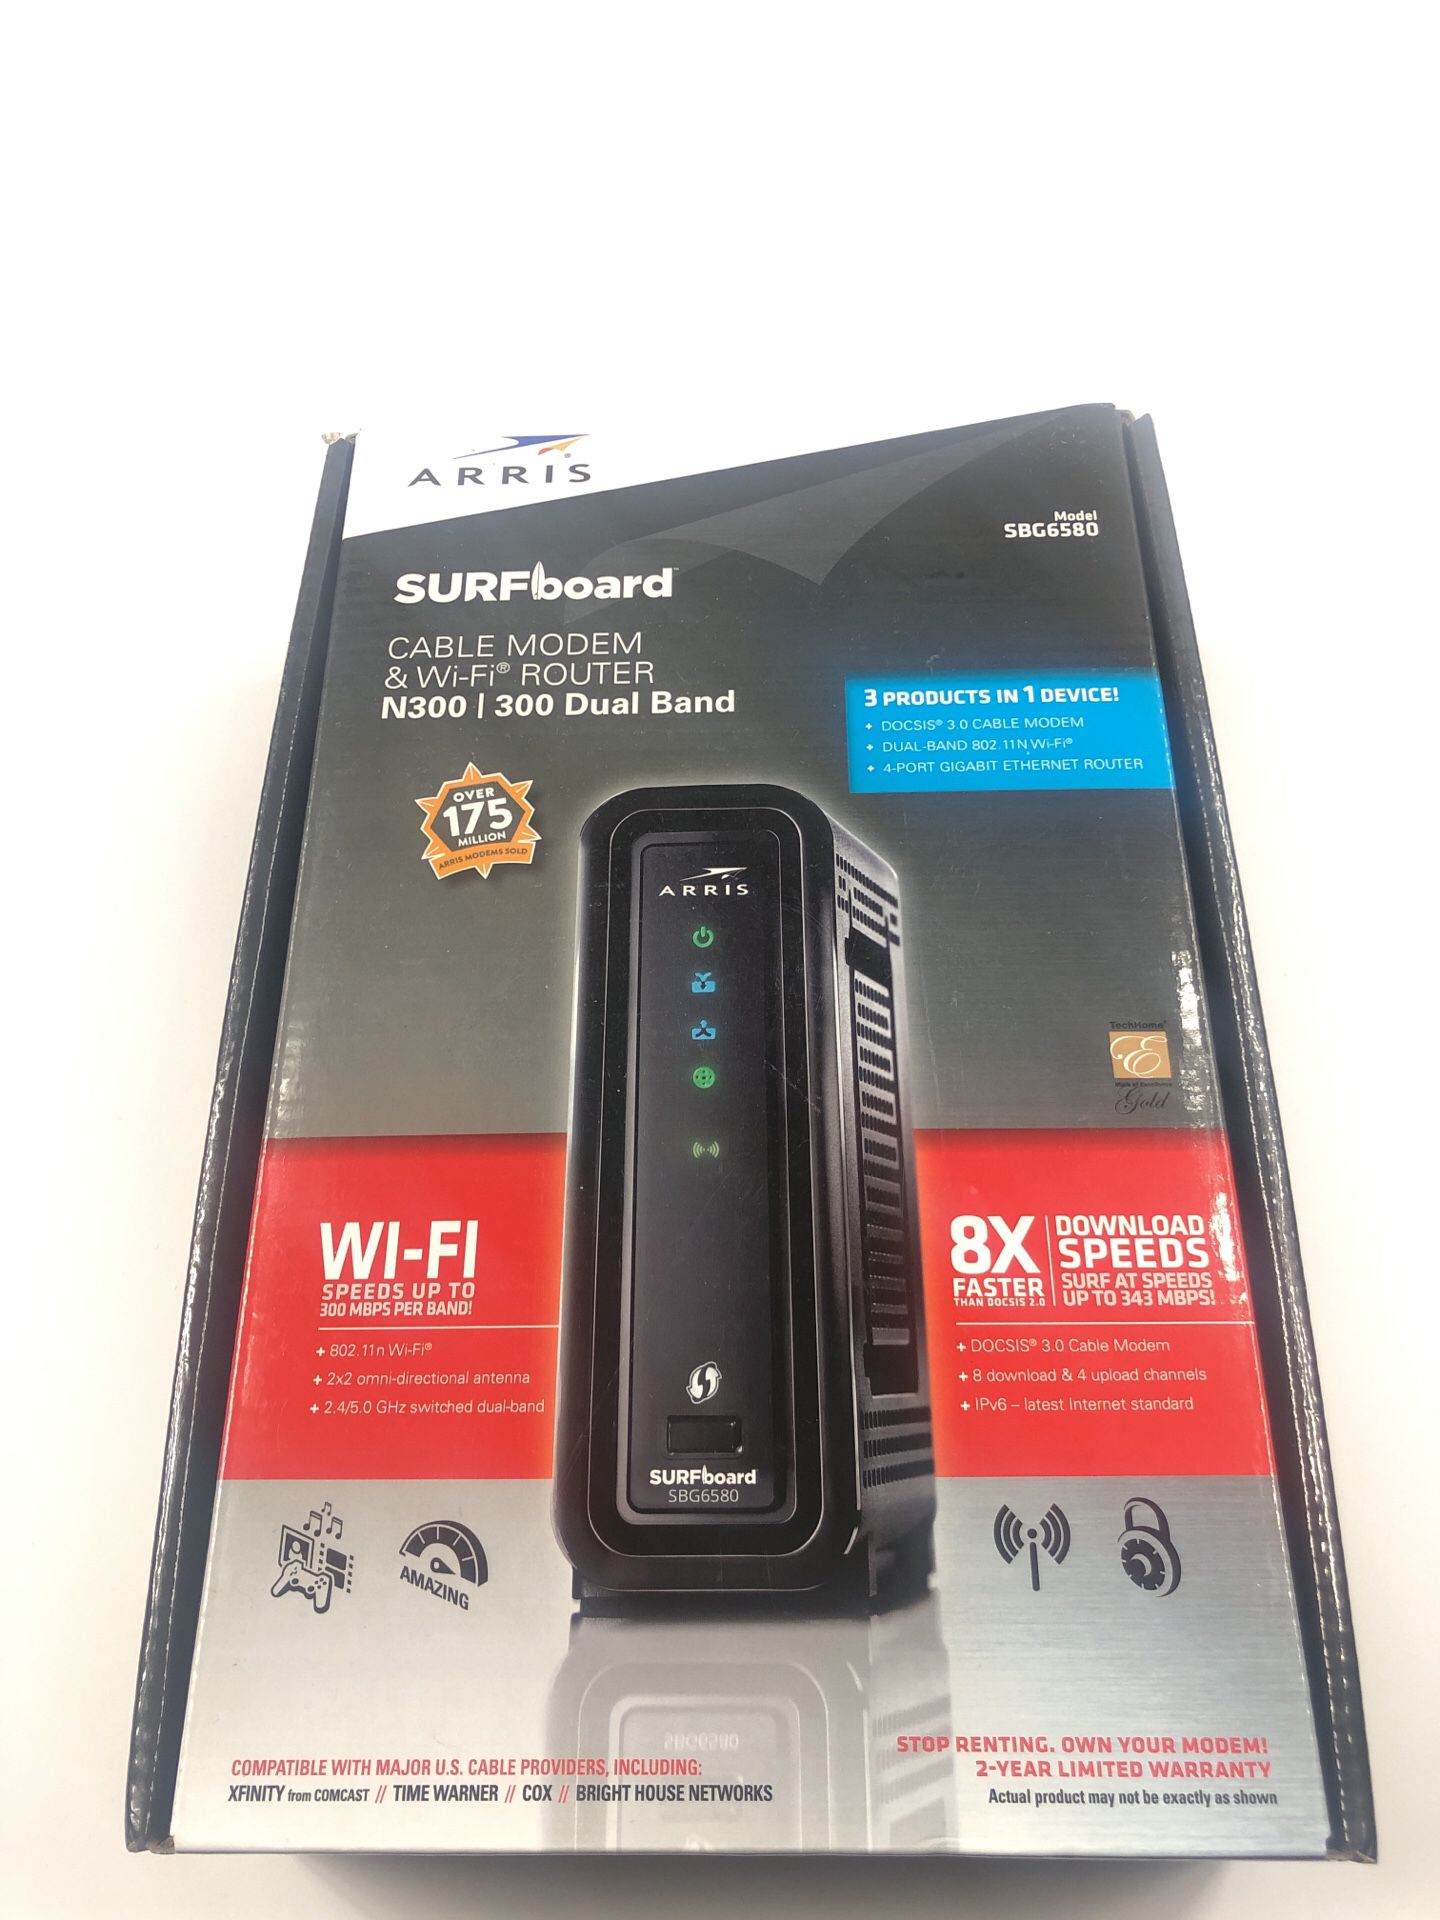 Surfboard router